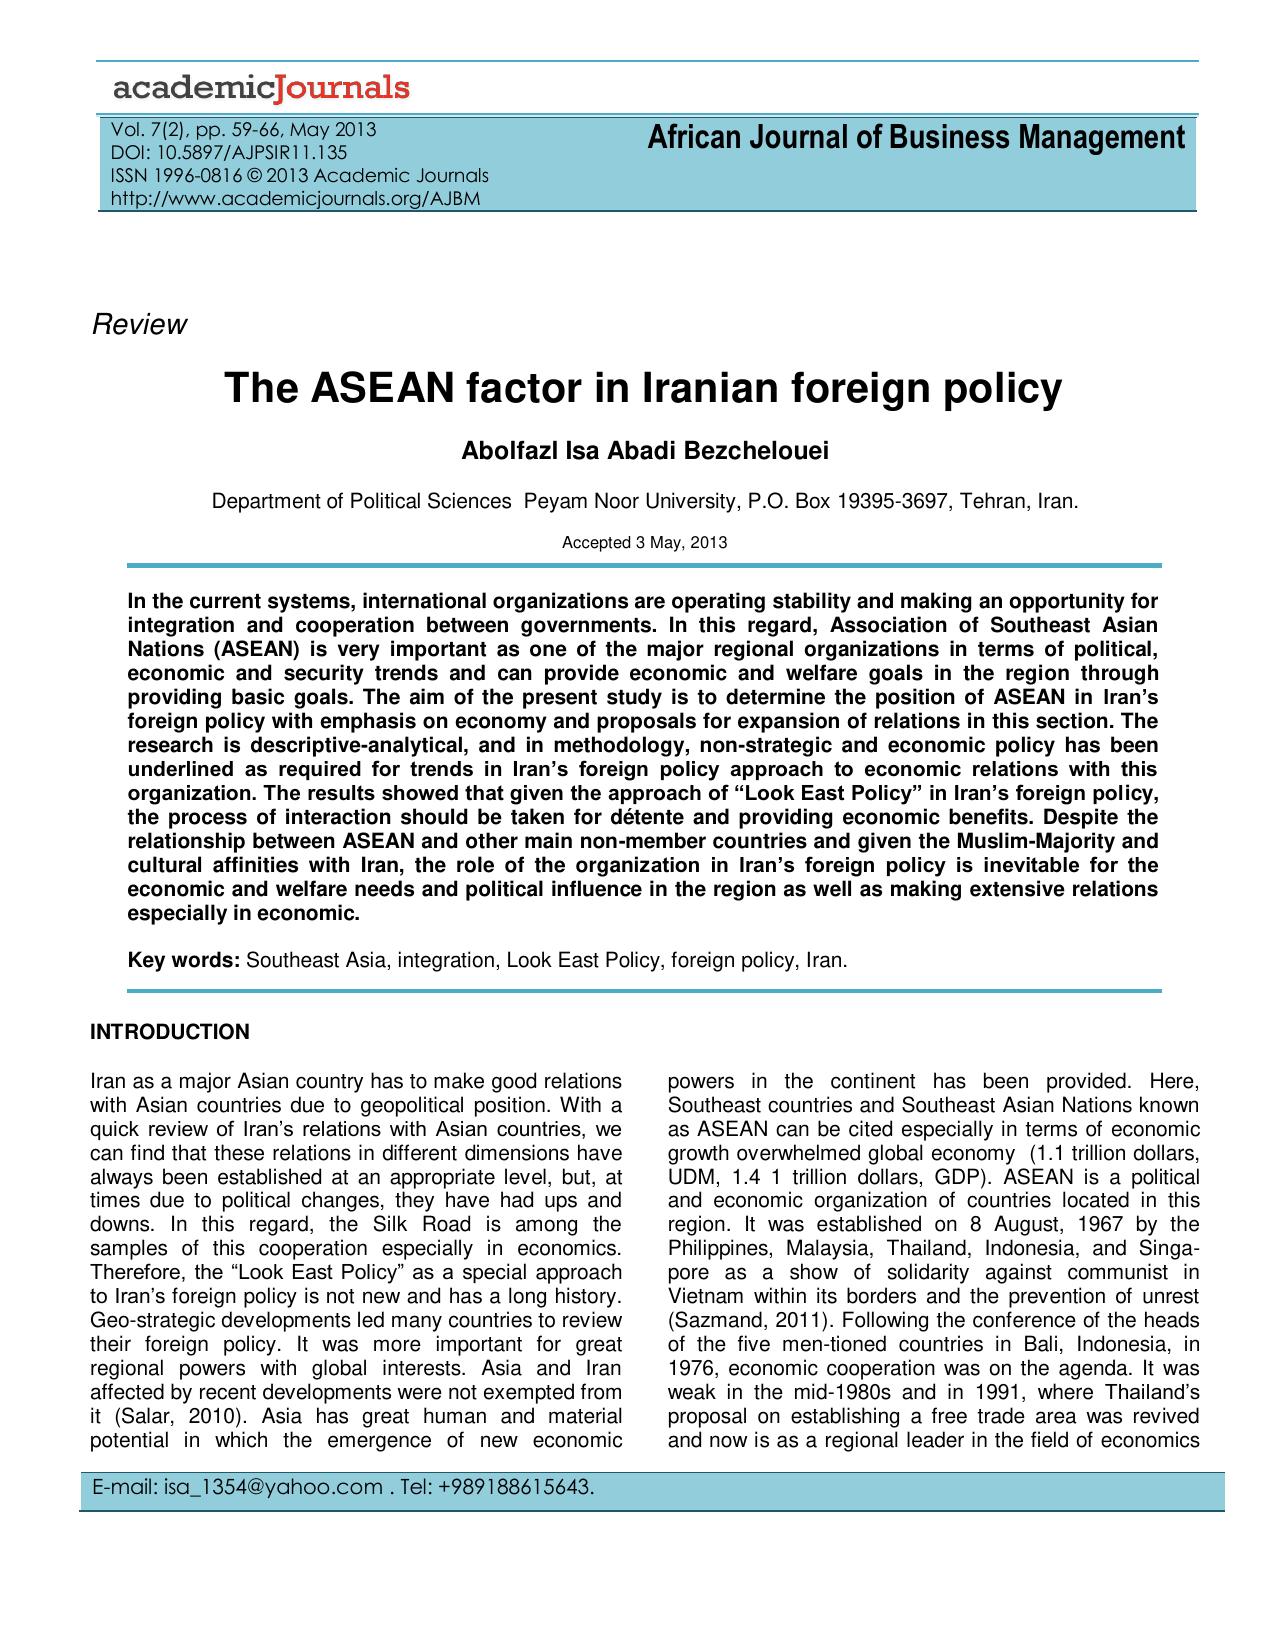 The ASEAN factor in Iranian foreign policy 2013